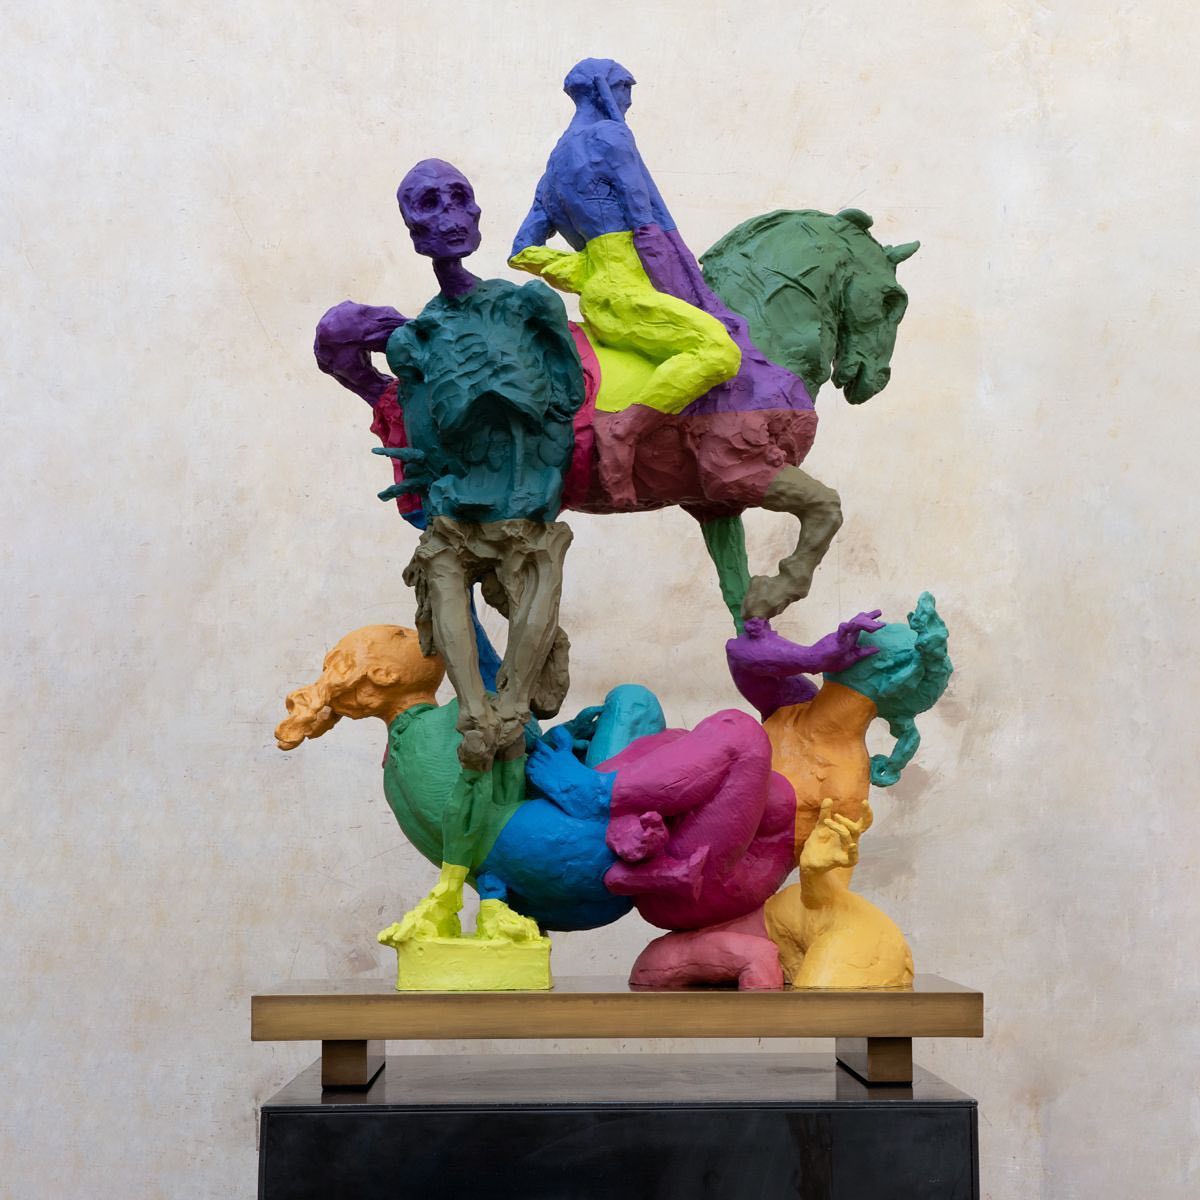 Multicolored 3d Printed Sculptures By Javier Marin (7)